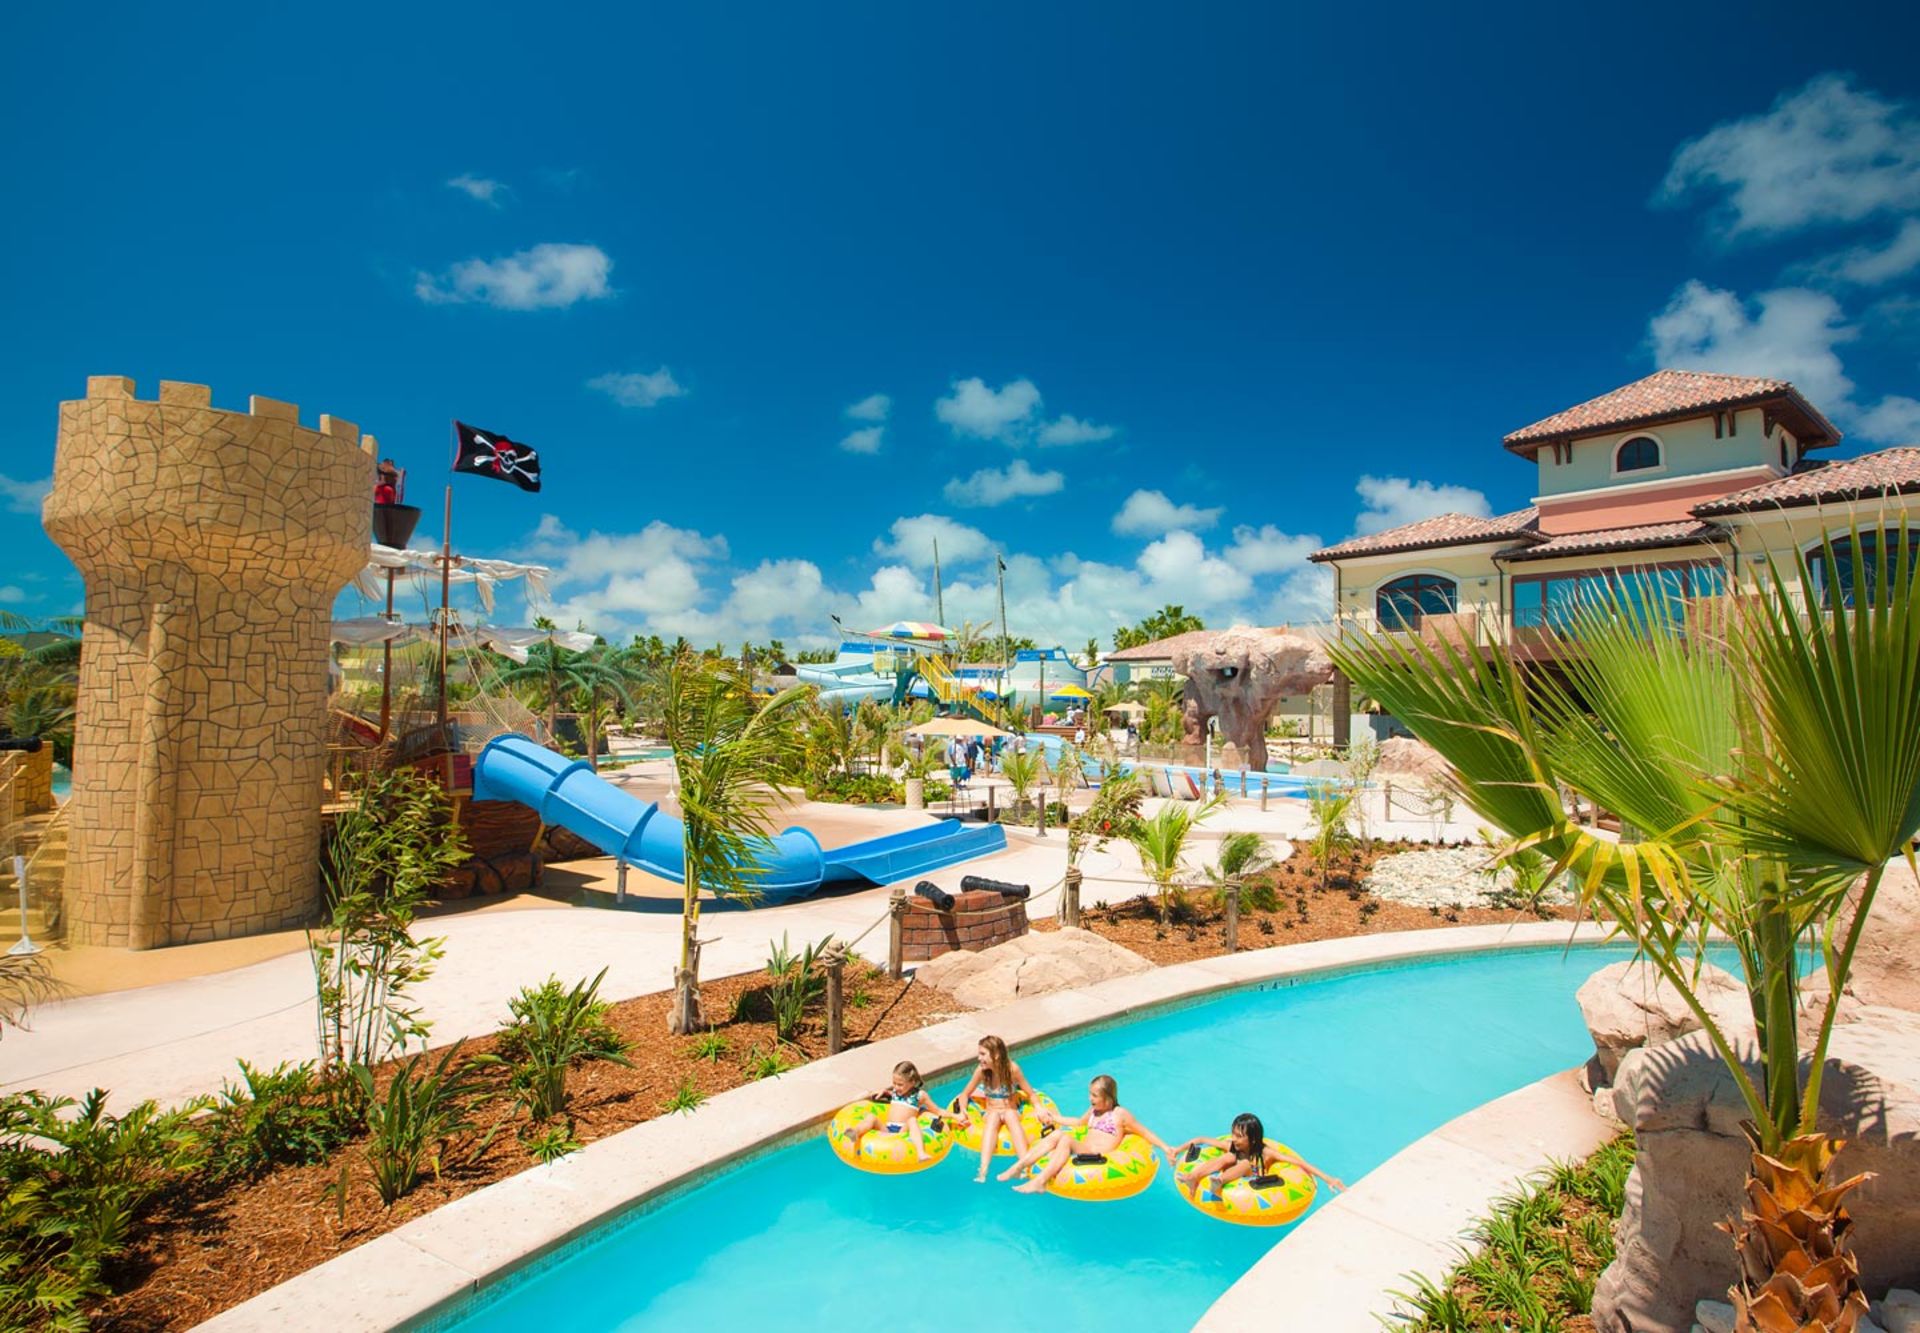 Beaches, Turks and Caicos luxury all inclusive family holidays in the